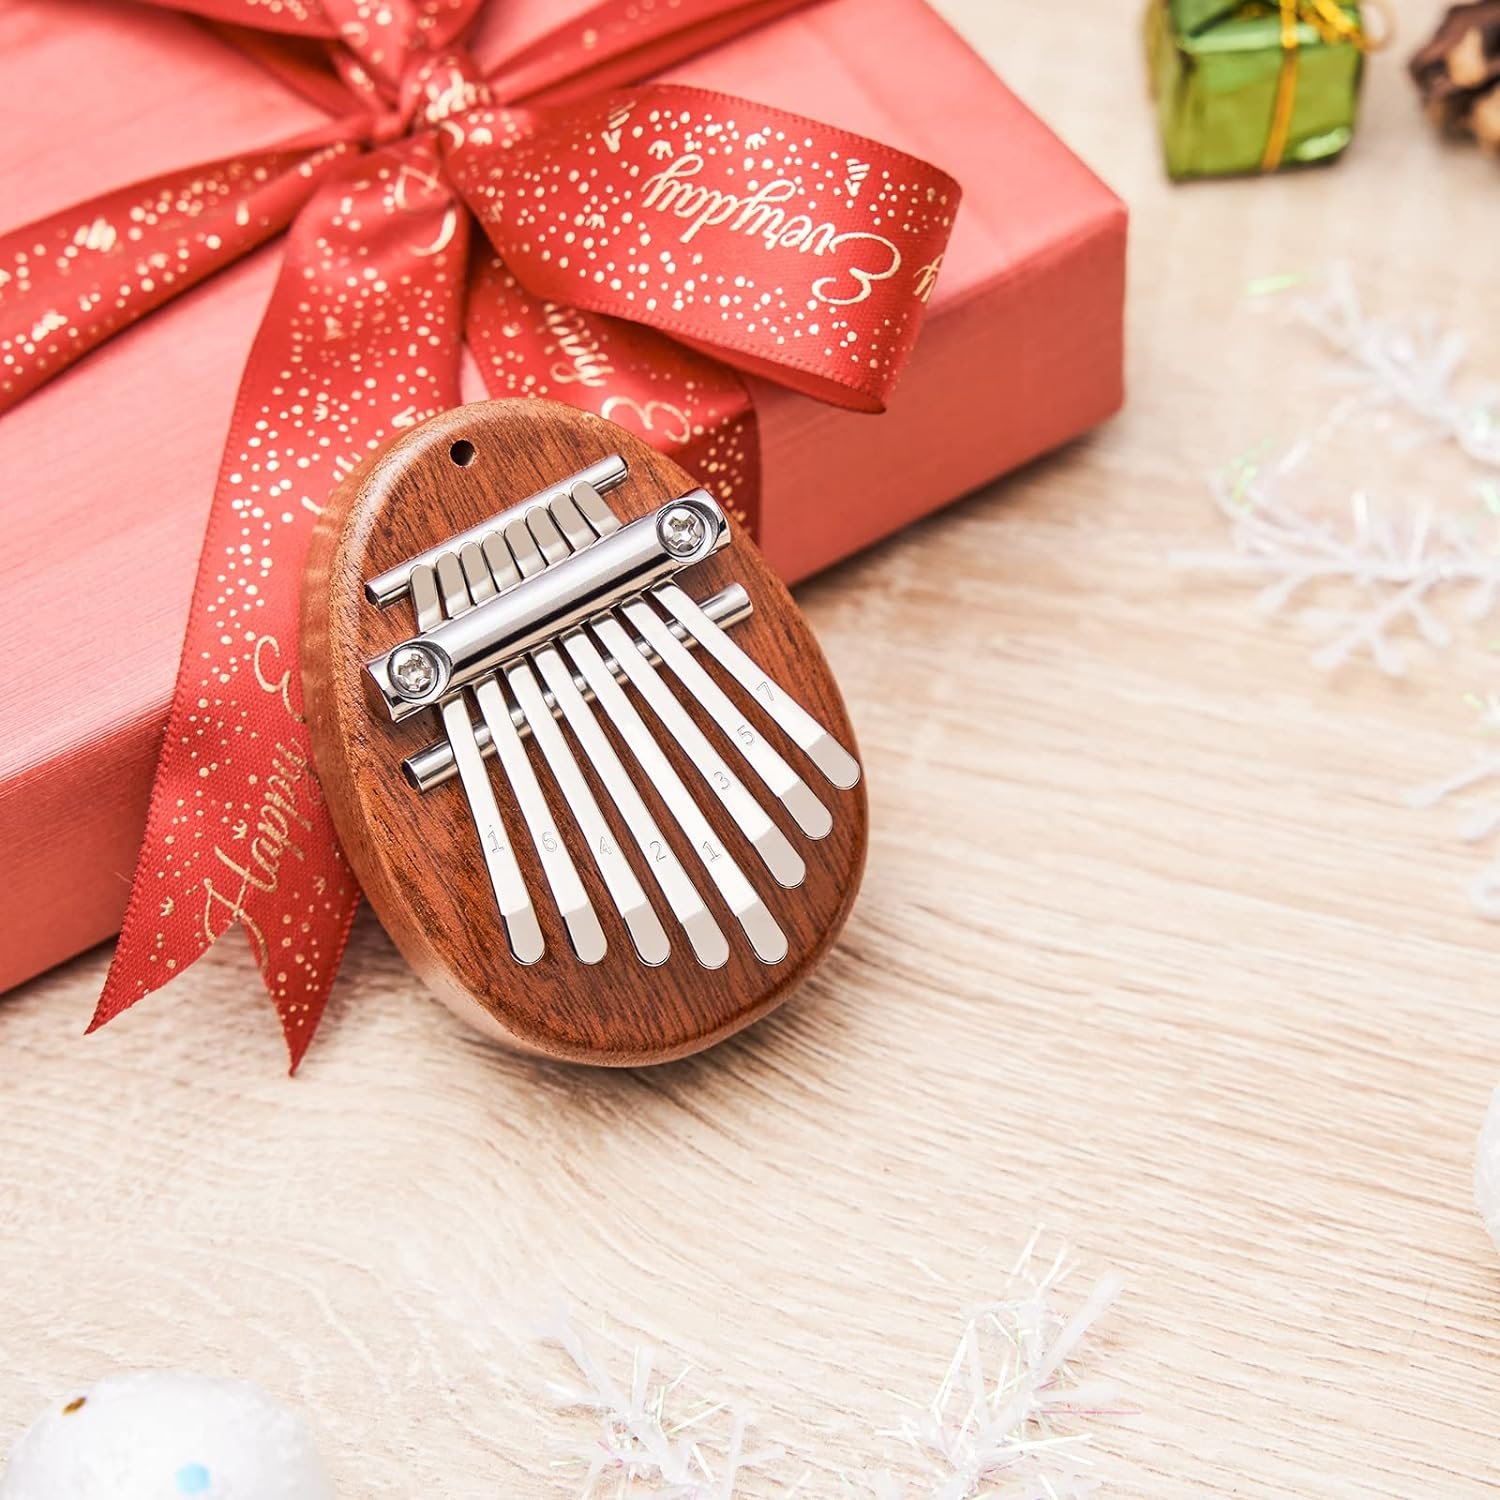 Lronbird Mini Kalimba 8 Key Exquisite Finger Thumb Piano Gifts for Beginners Music Lovers Players, Cute Instrument Pendant Keychain Accessories Miniature Things Ornament for Christmas Tree (Oval)